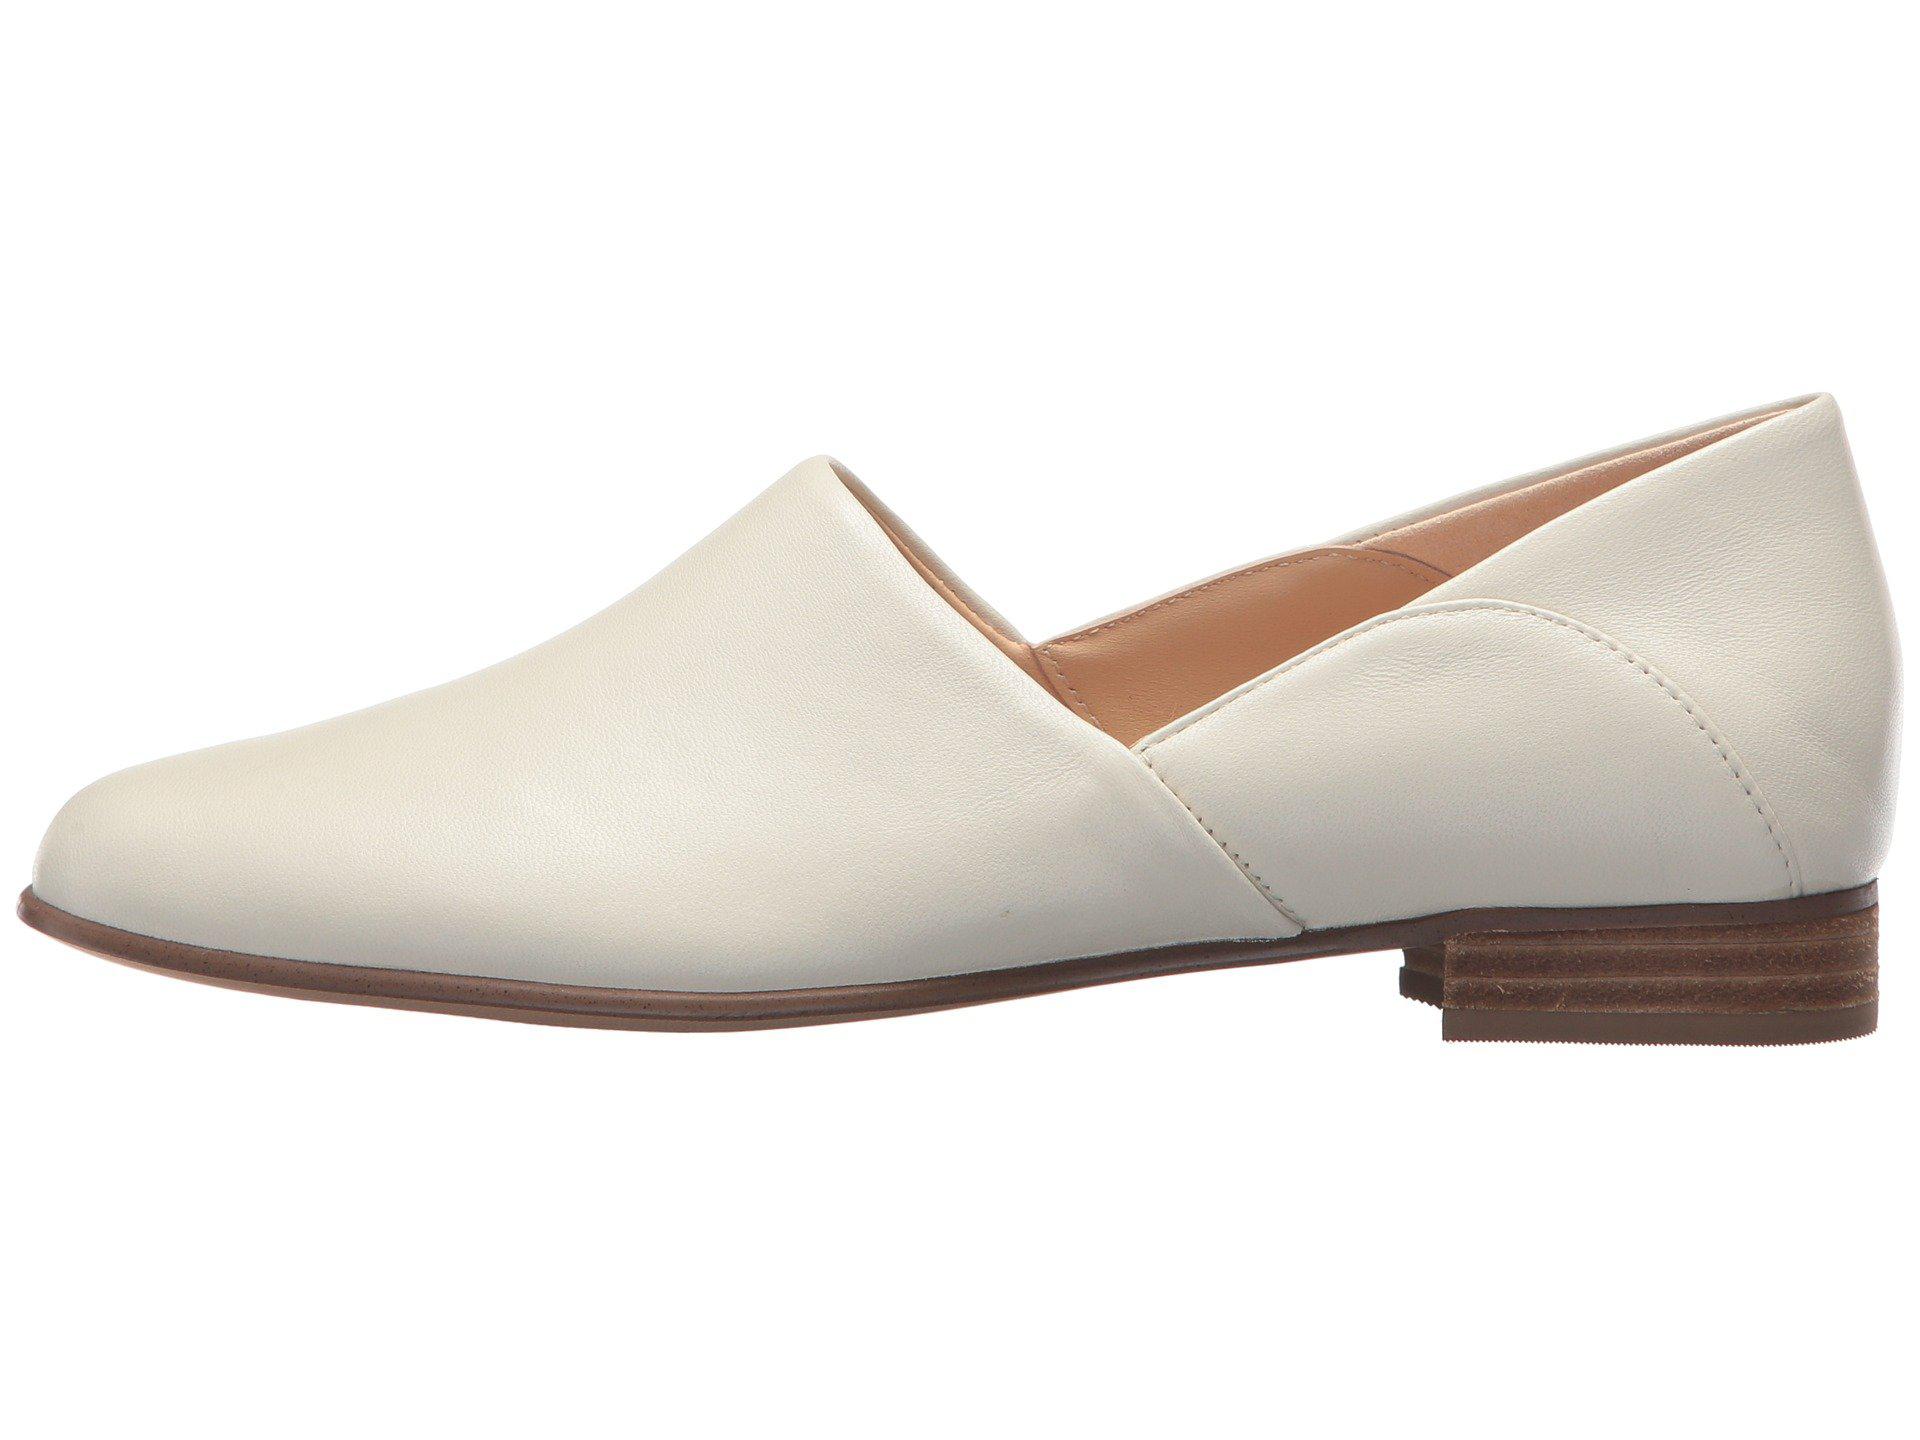 Lyst - Clarks Pure Tone (white Leather) Women's Shoes in White